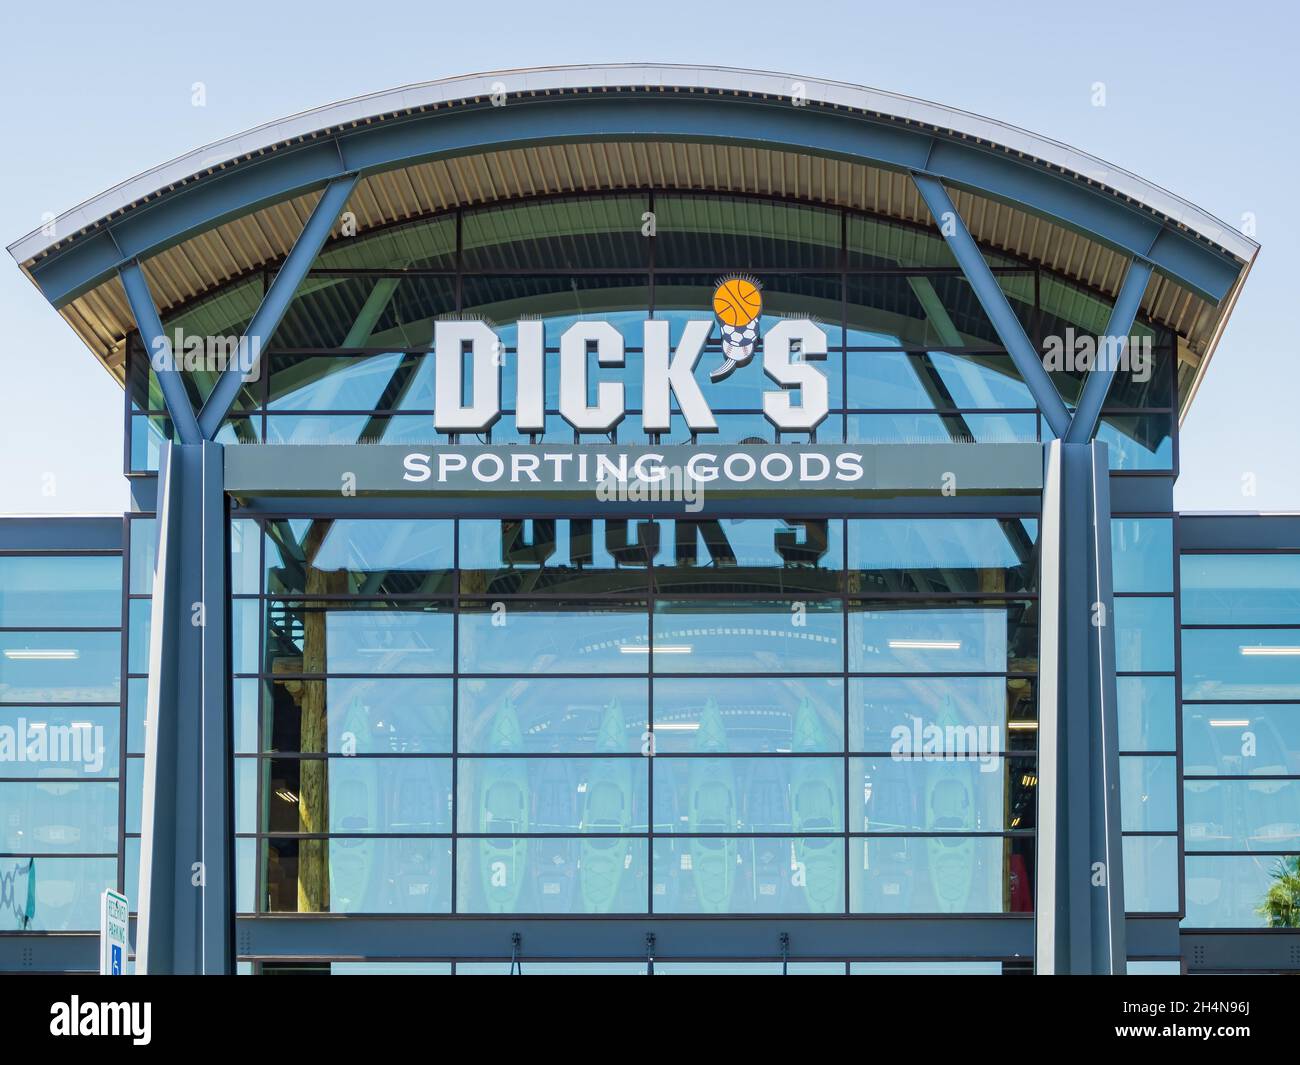 Henderson, MAY 11 2021 - Exterior view of the Dick's Sporting Goods store Stock Photo